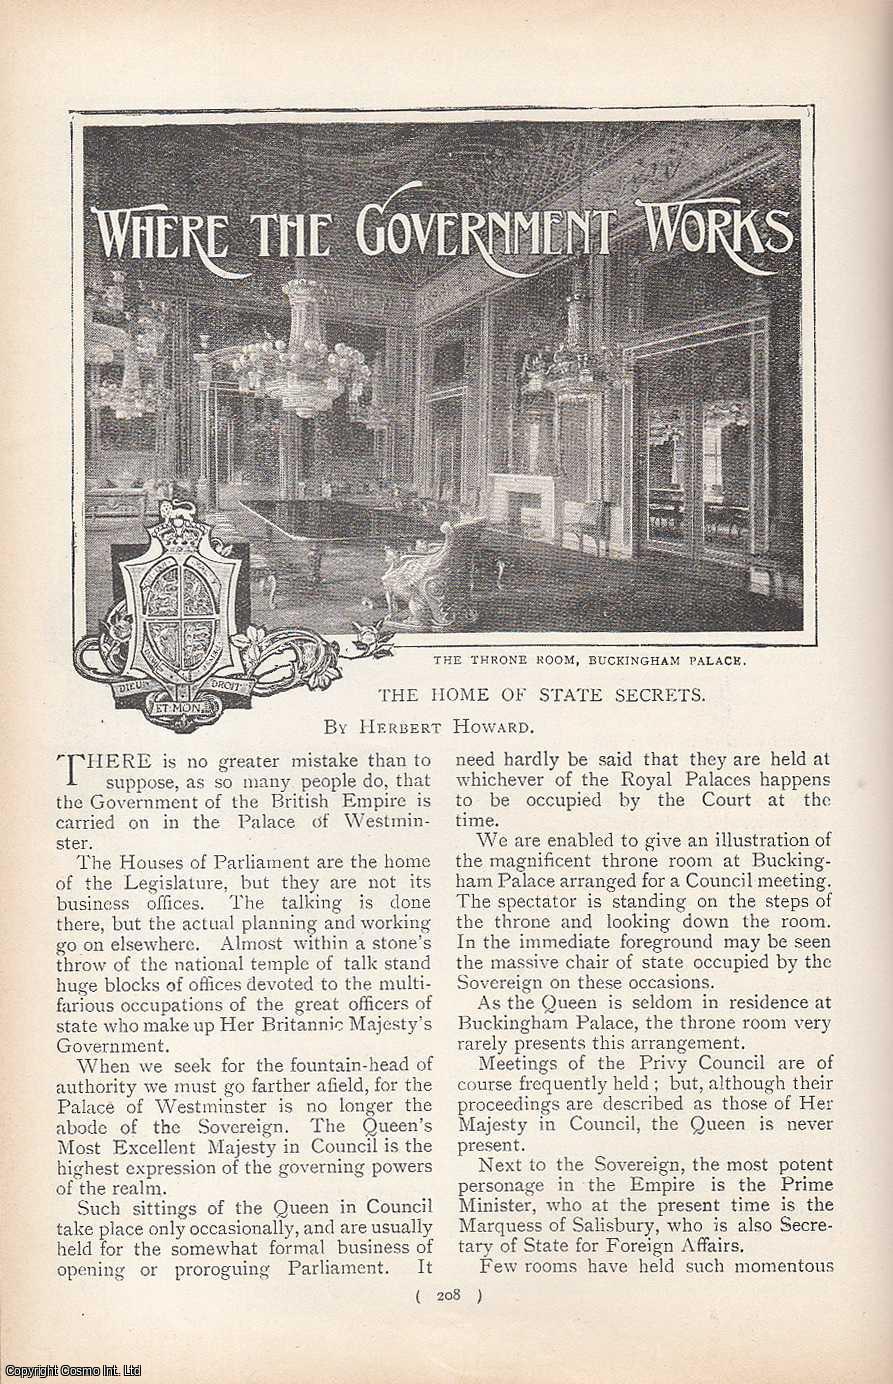 Herbert Howard - Buckingham Palace, Mr. Balfour's Room at 10, Downing Street, Mr. Chamberlain's Room at The Colonial Office & more. Where The Government Works : The Home of State Secrets. An uncommon original article from the Harmsworth London Magazine, 1901.